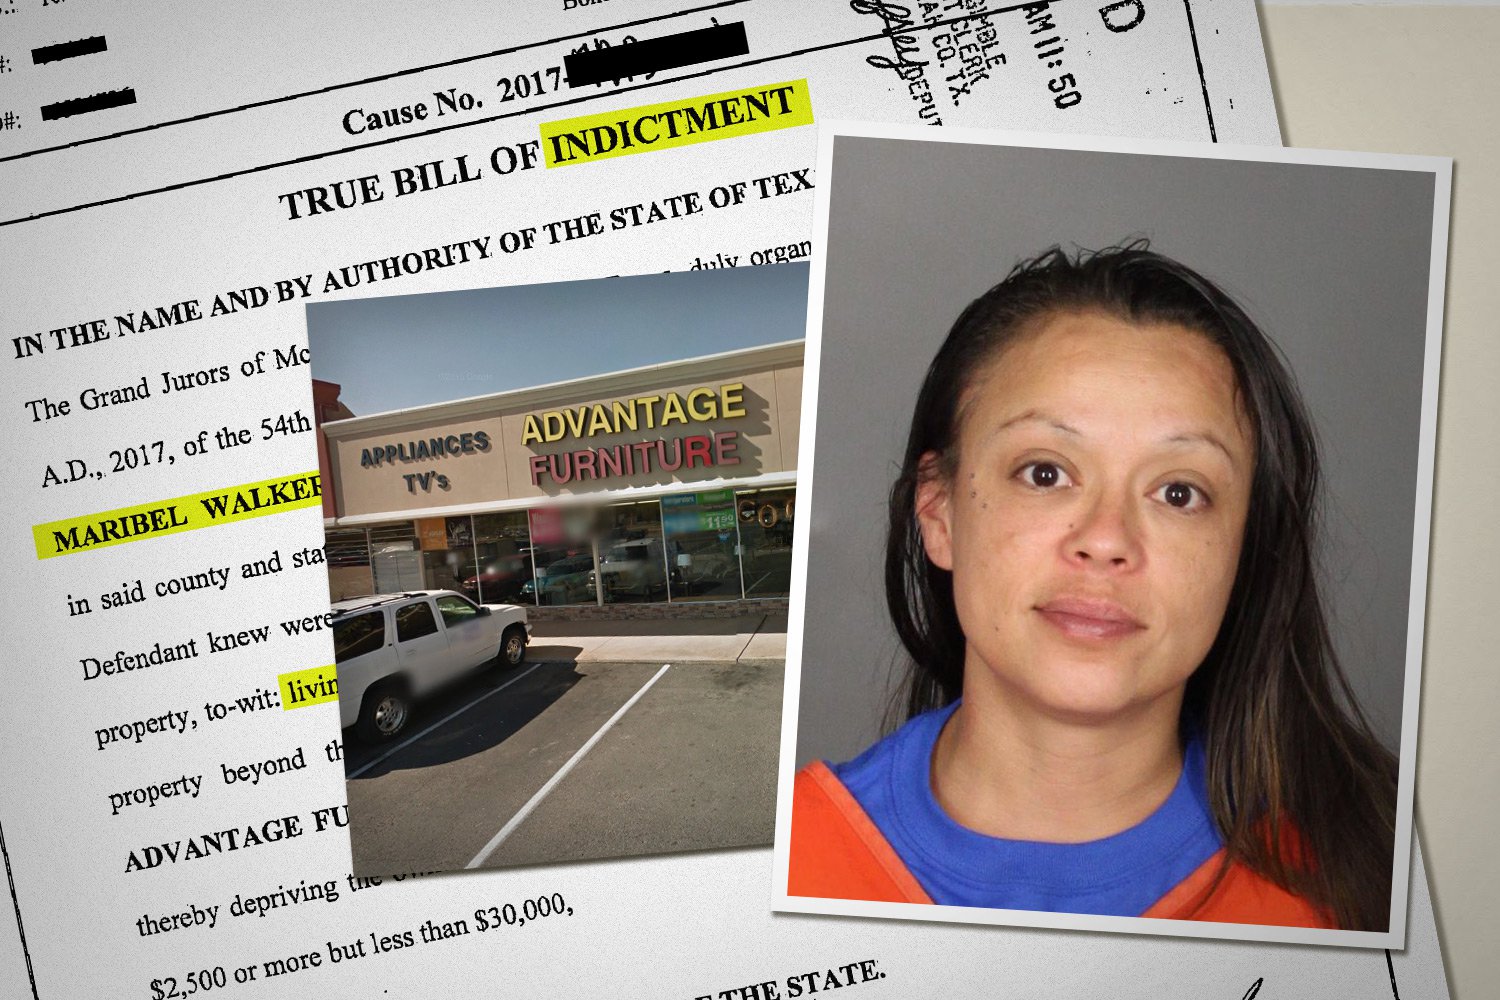 Maribel Walker rented bedroom and living room furniture in April 2015. When she forgot to make payments and failed to return the furniture for more than a year, she was arrested, jailed and now faces felony prosecution. Todd Wiseman